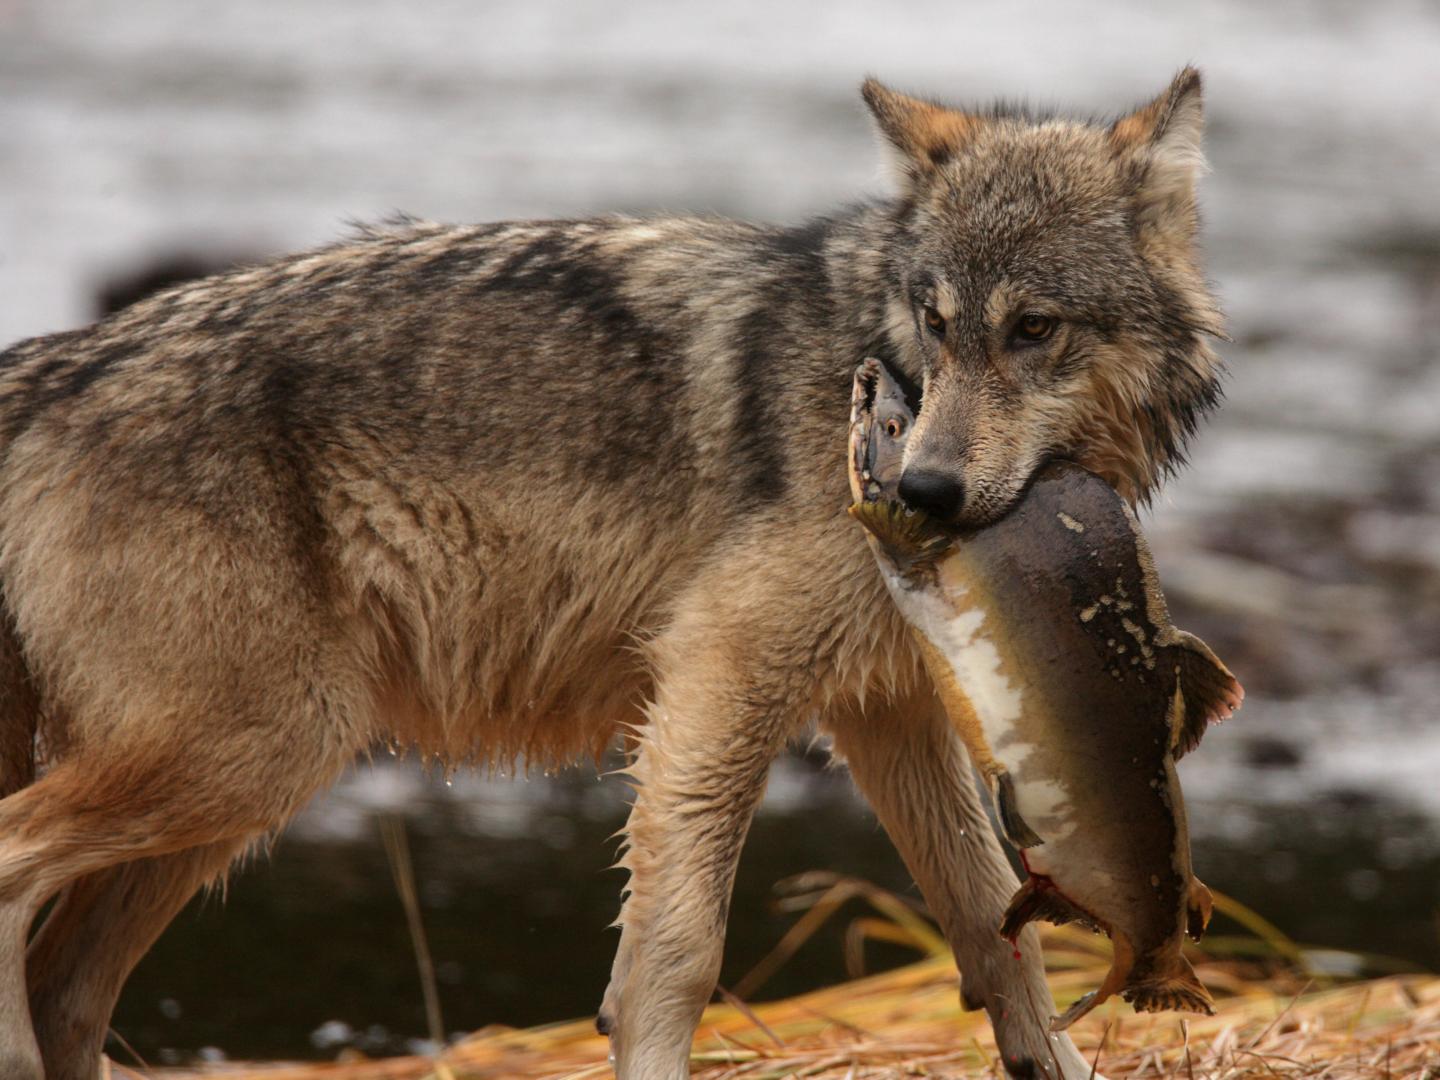 A coastal wolf is hunting salmon in British Columbia, Canada. Photo by Guillaume Mazille